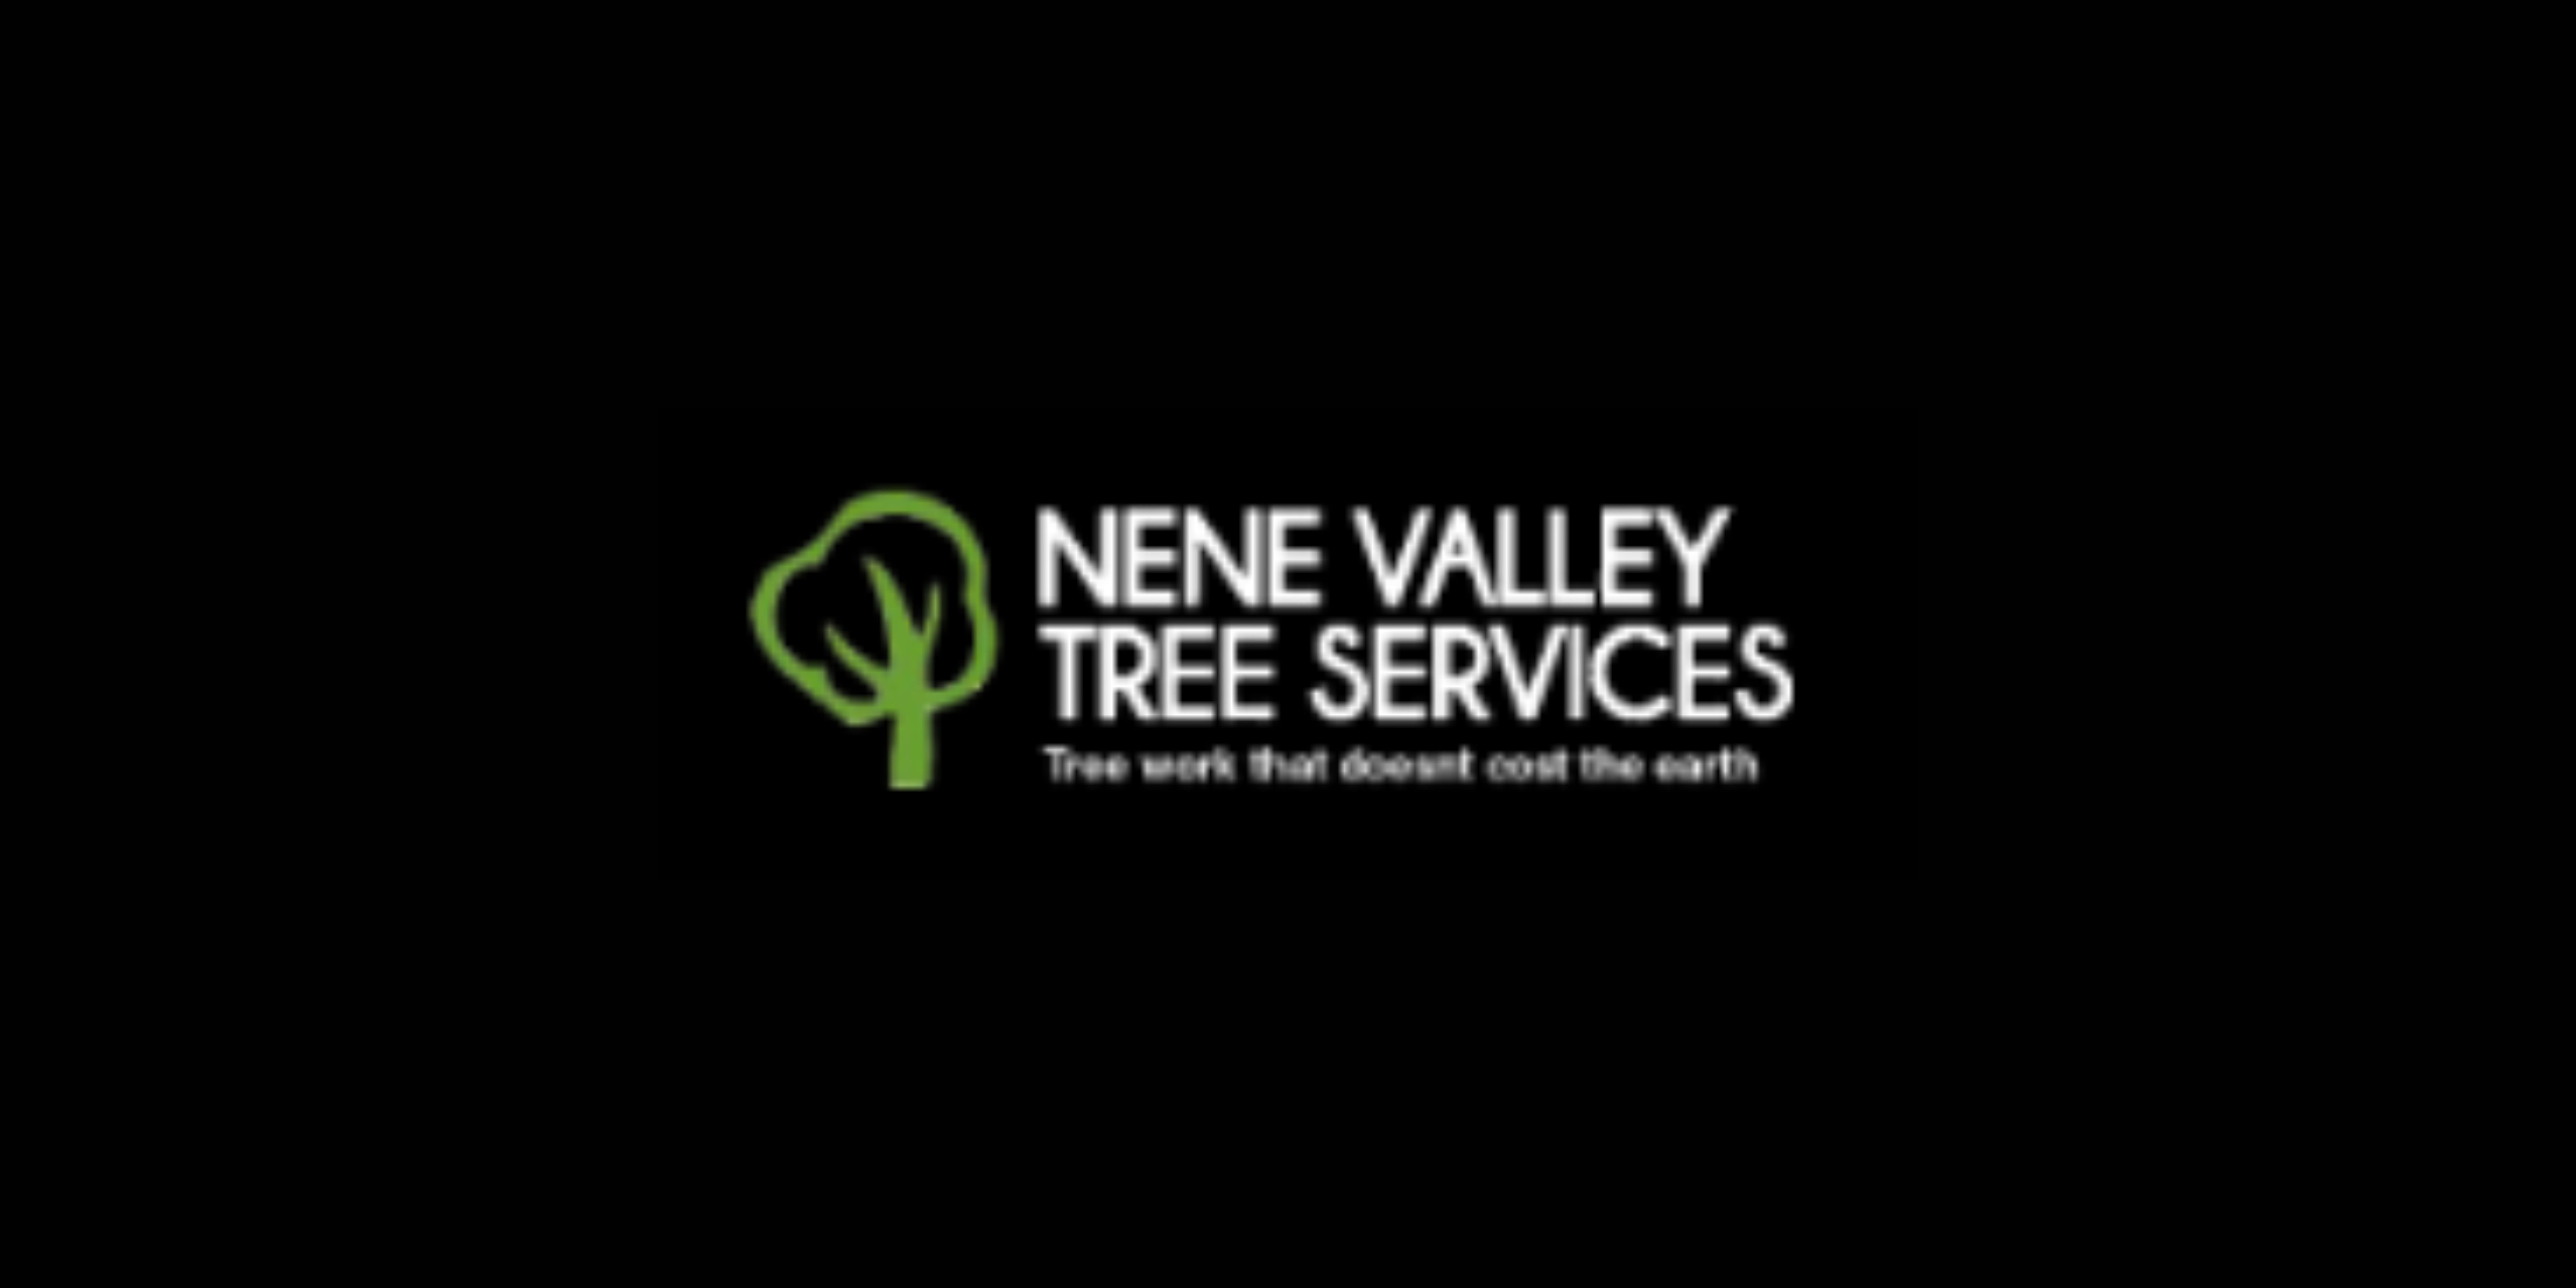 Nene Valley Tree Services Limited